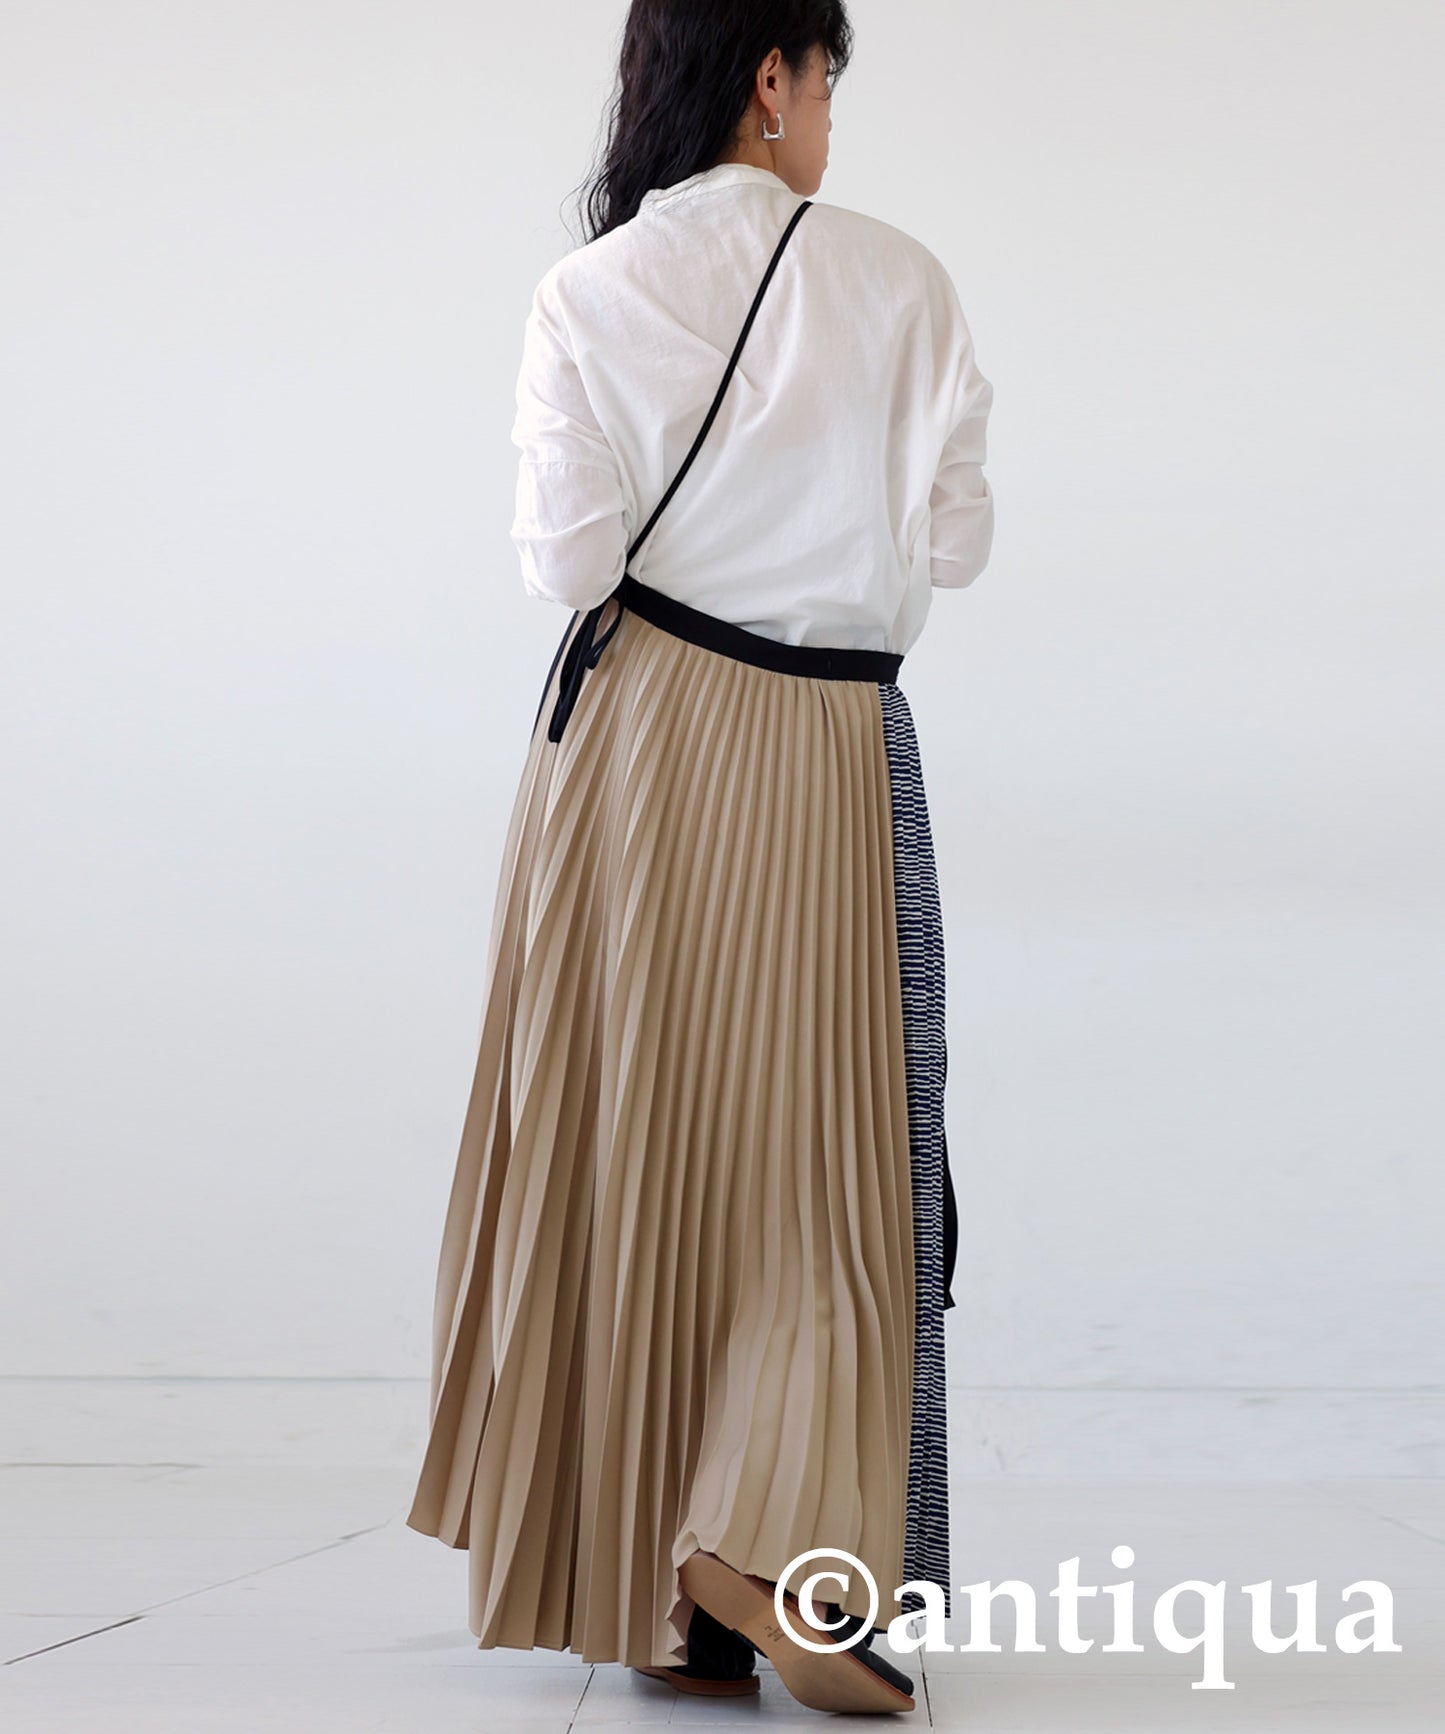 Ladies wrap pleated skirt one shoulder casual dress